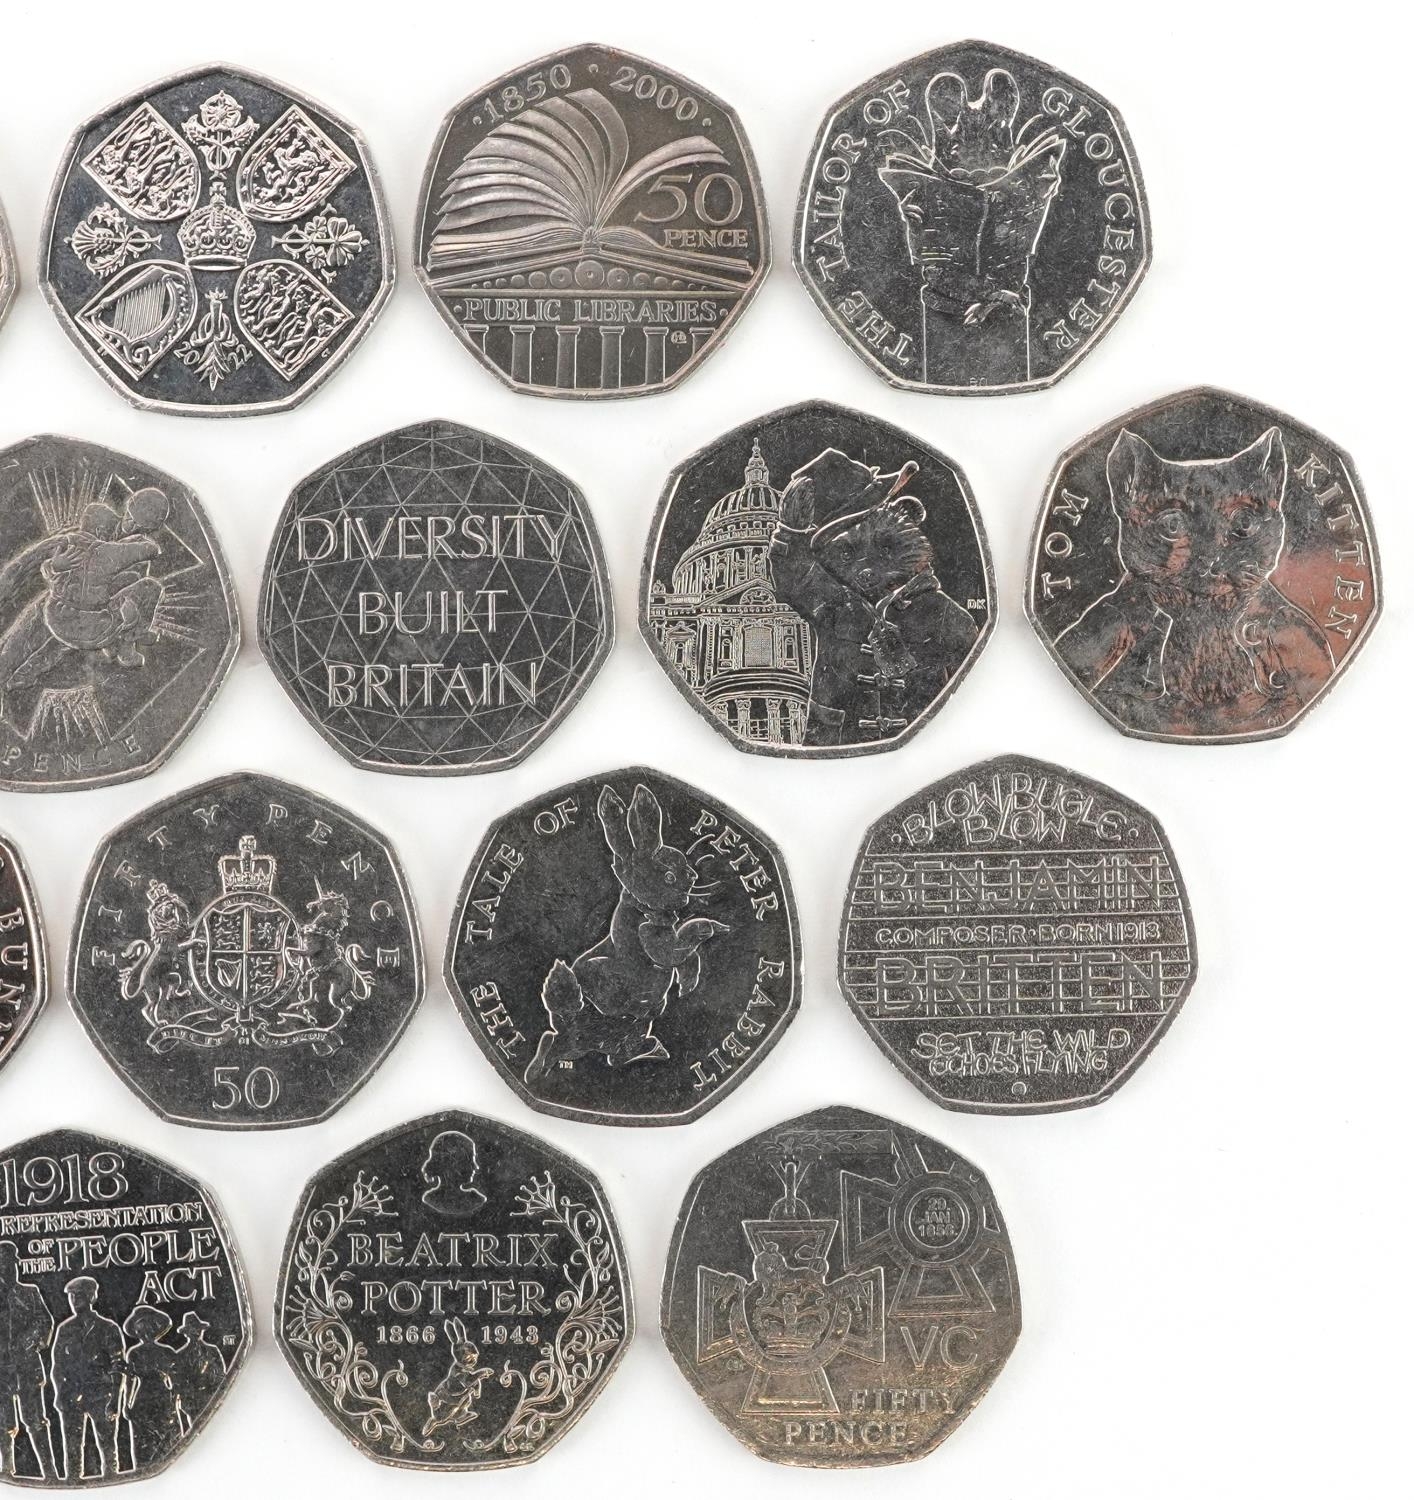 Twenty Elizabeth II fifty pence pieces, various designs including London 2012 Olympics and - Image 3 of 6